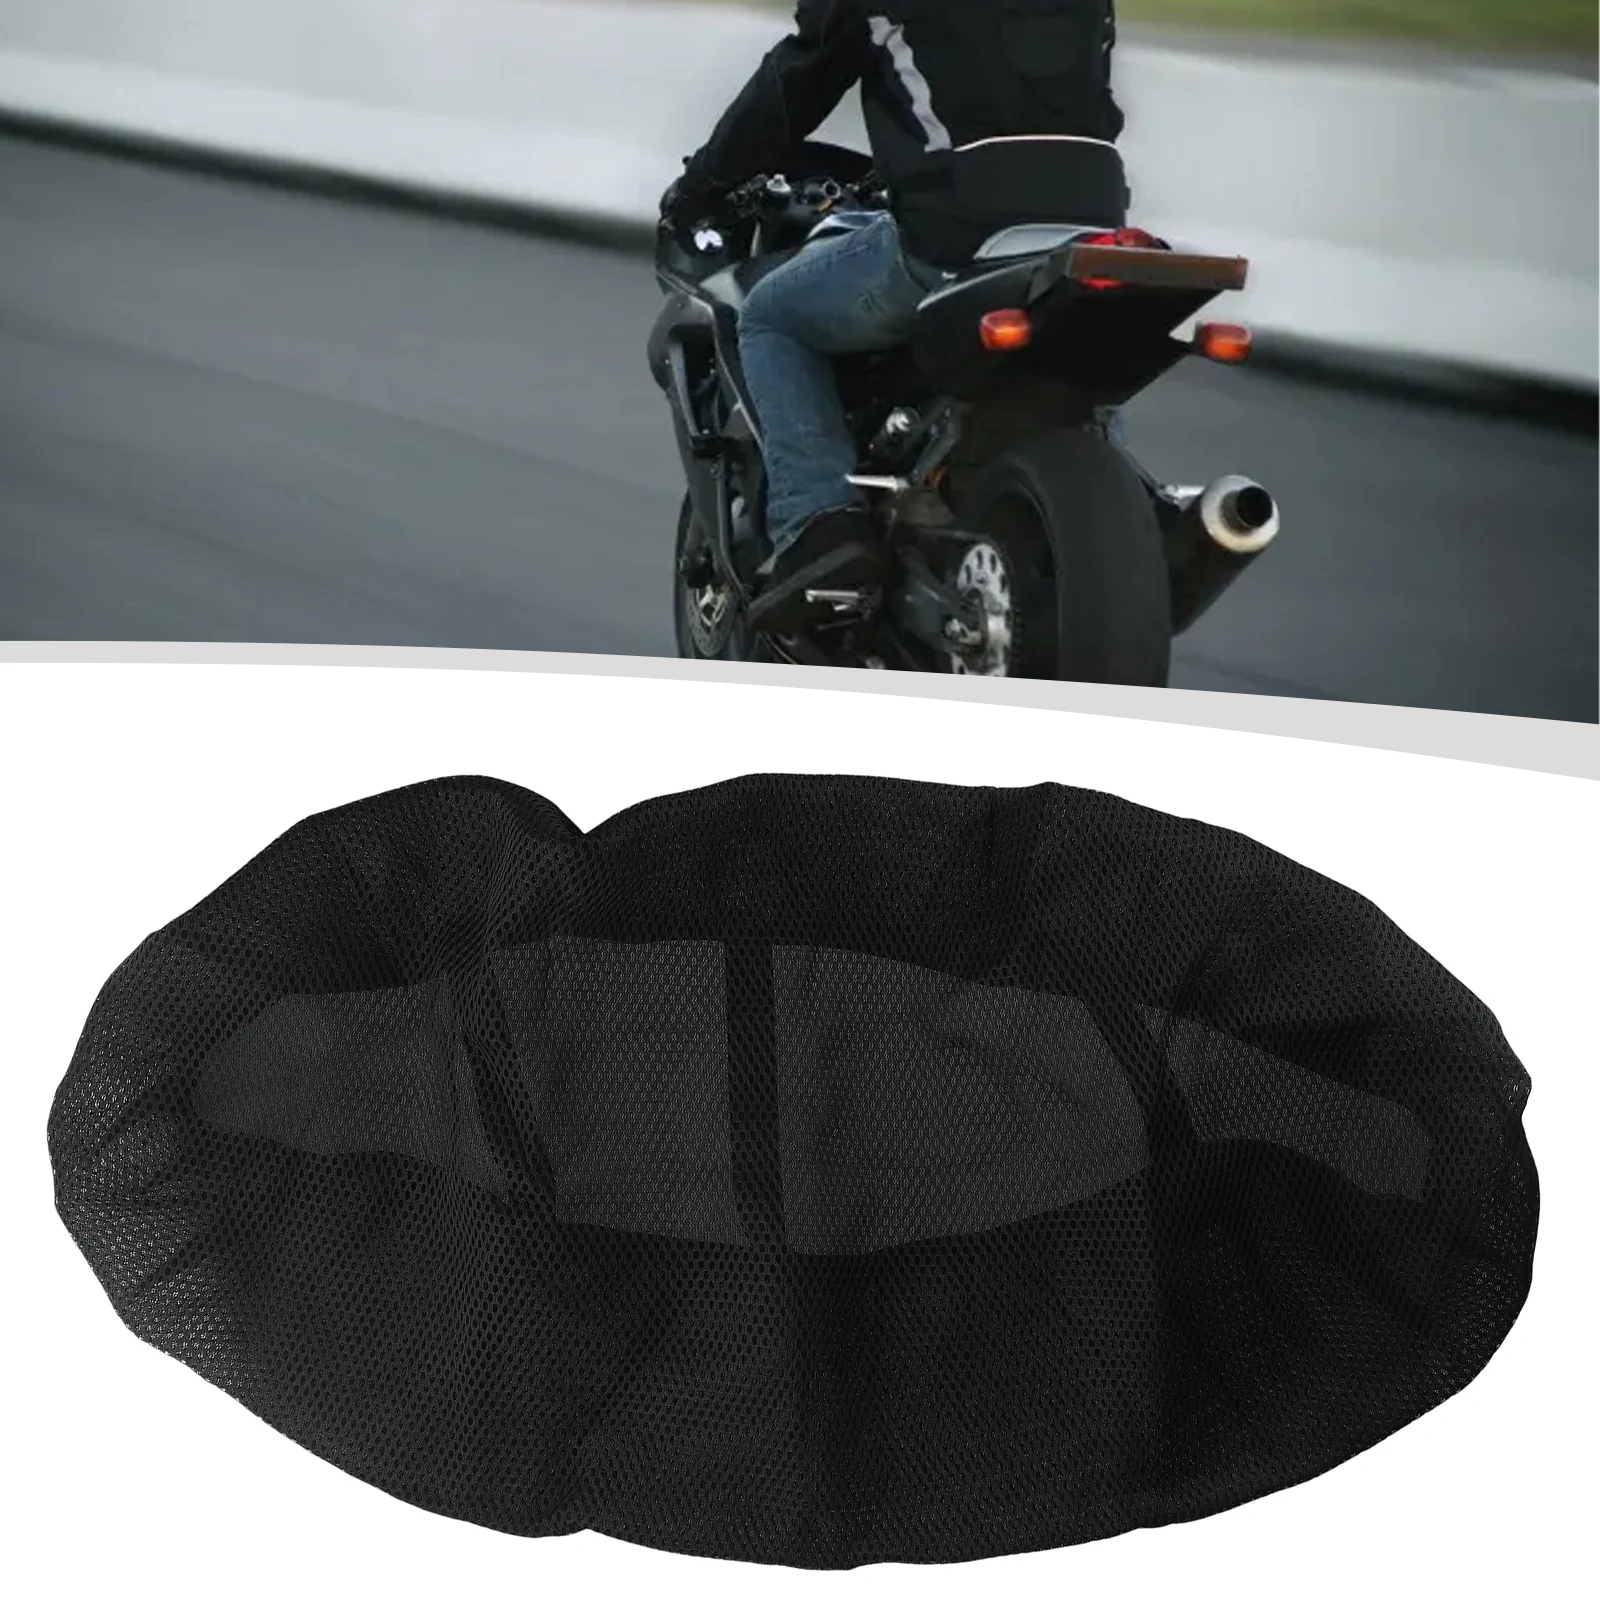 Motorcycle Cushion Seat Cover Motorcycle Mildew-proof Moisture-proof Motorcycle Pad 85*60CM Anti-Slip Brand New